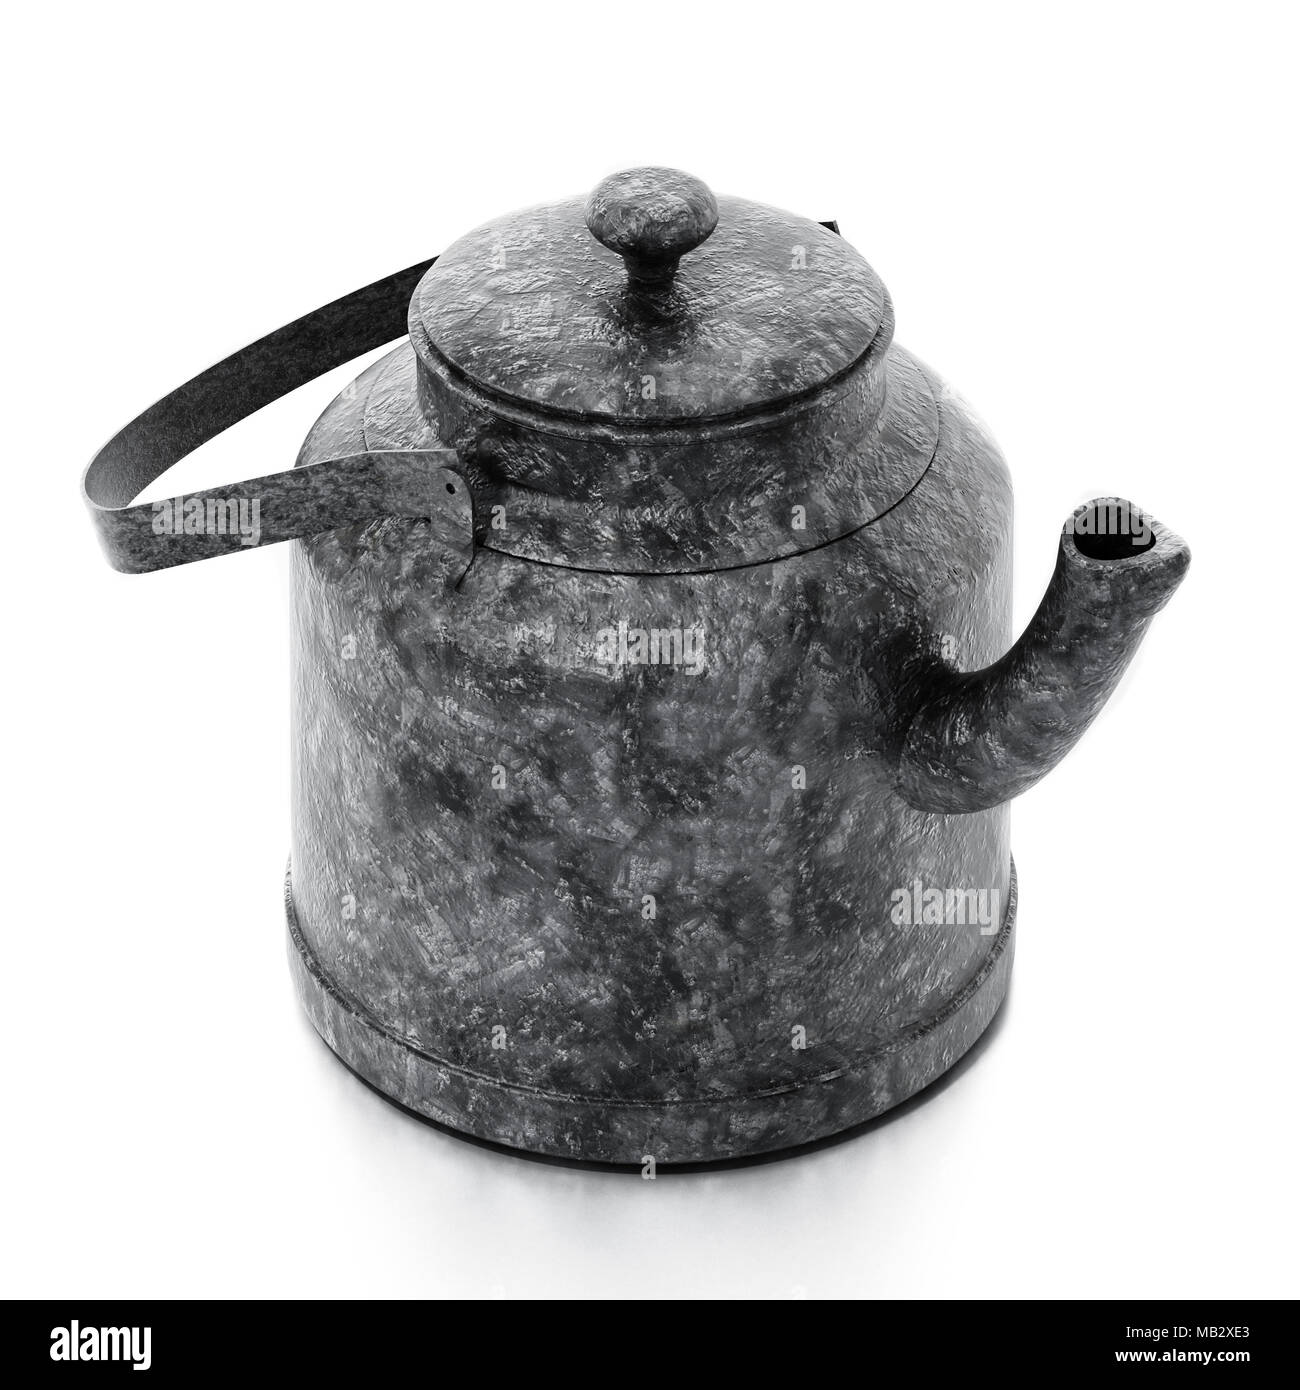 Glass of chai with an old fashioned kettle isolated over white background  Stock Photo - Alamy